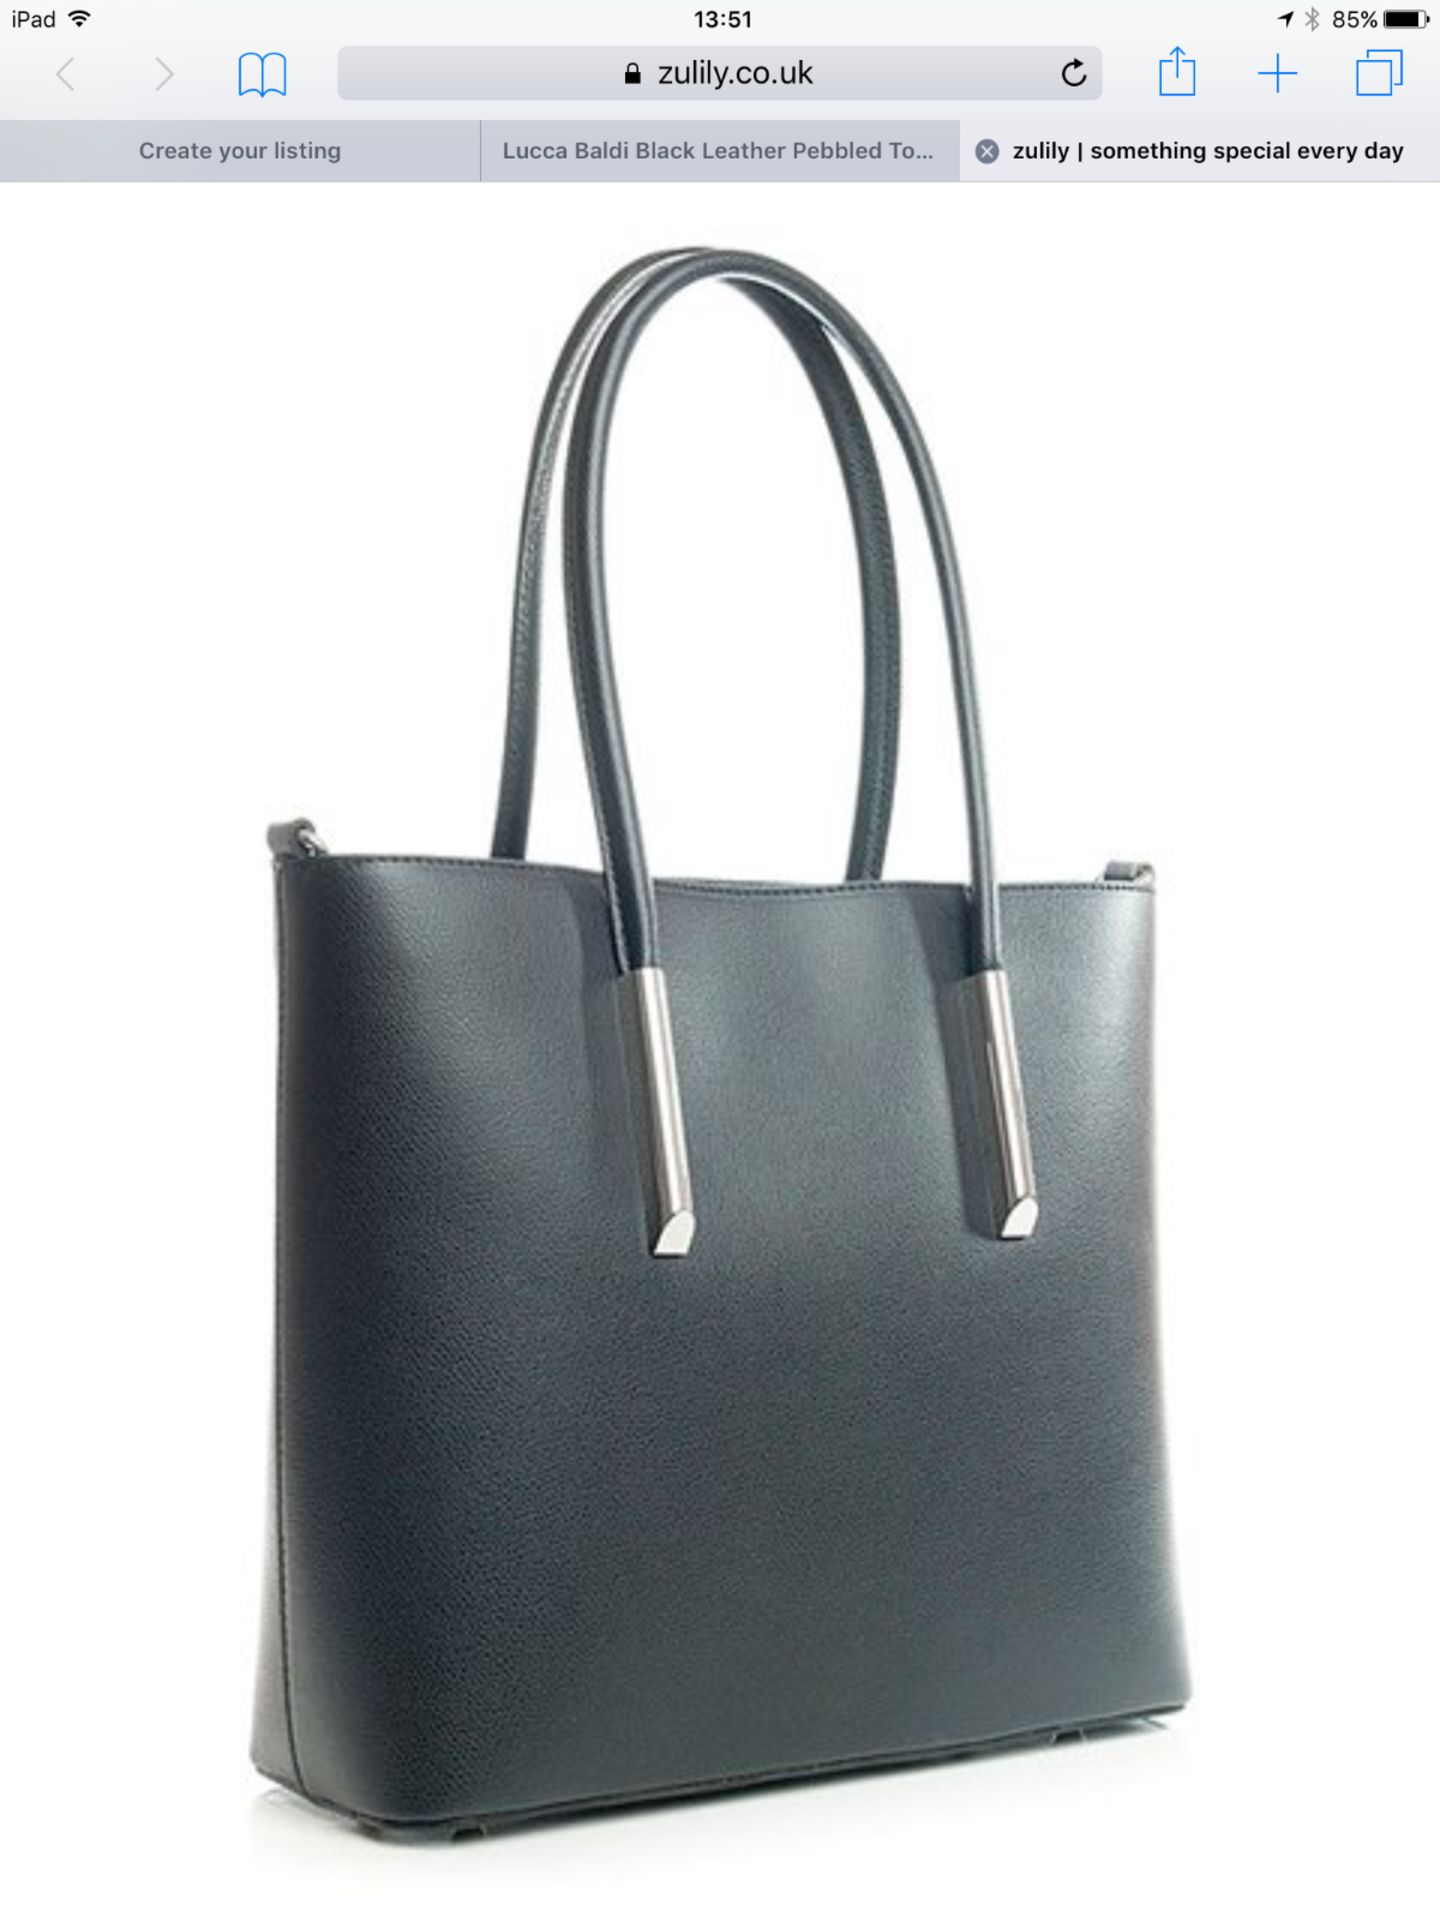 Lucca Baldi Black Leather Pebbled Tote (New with tags) [Ref: 45914641- T-101] - Image 2 of 6